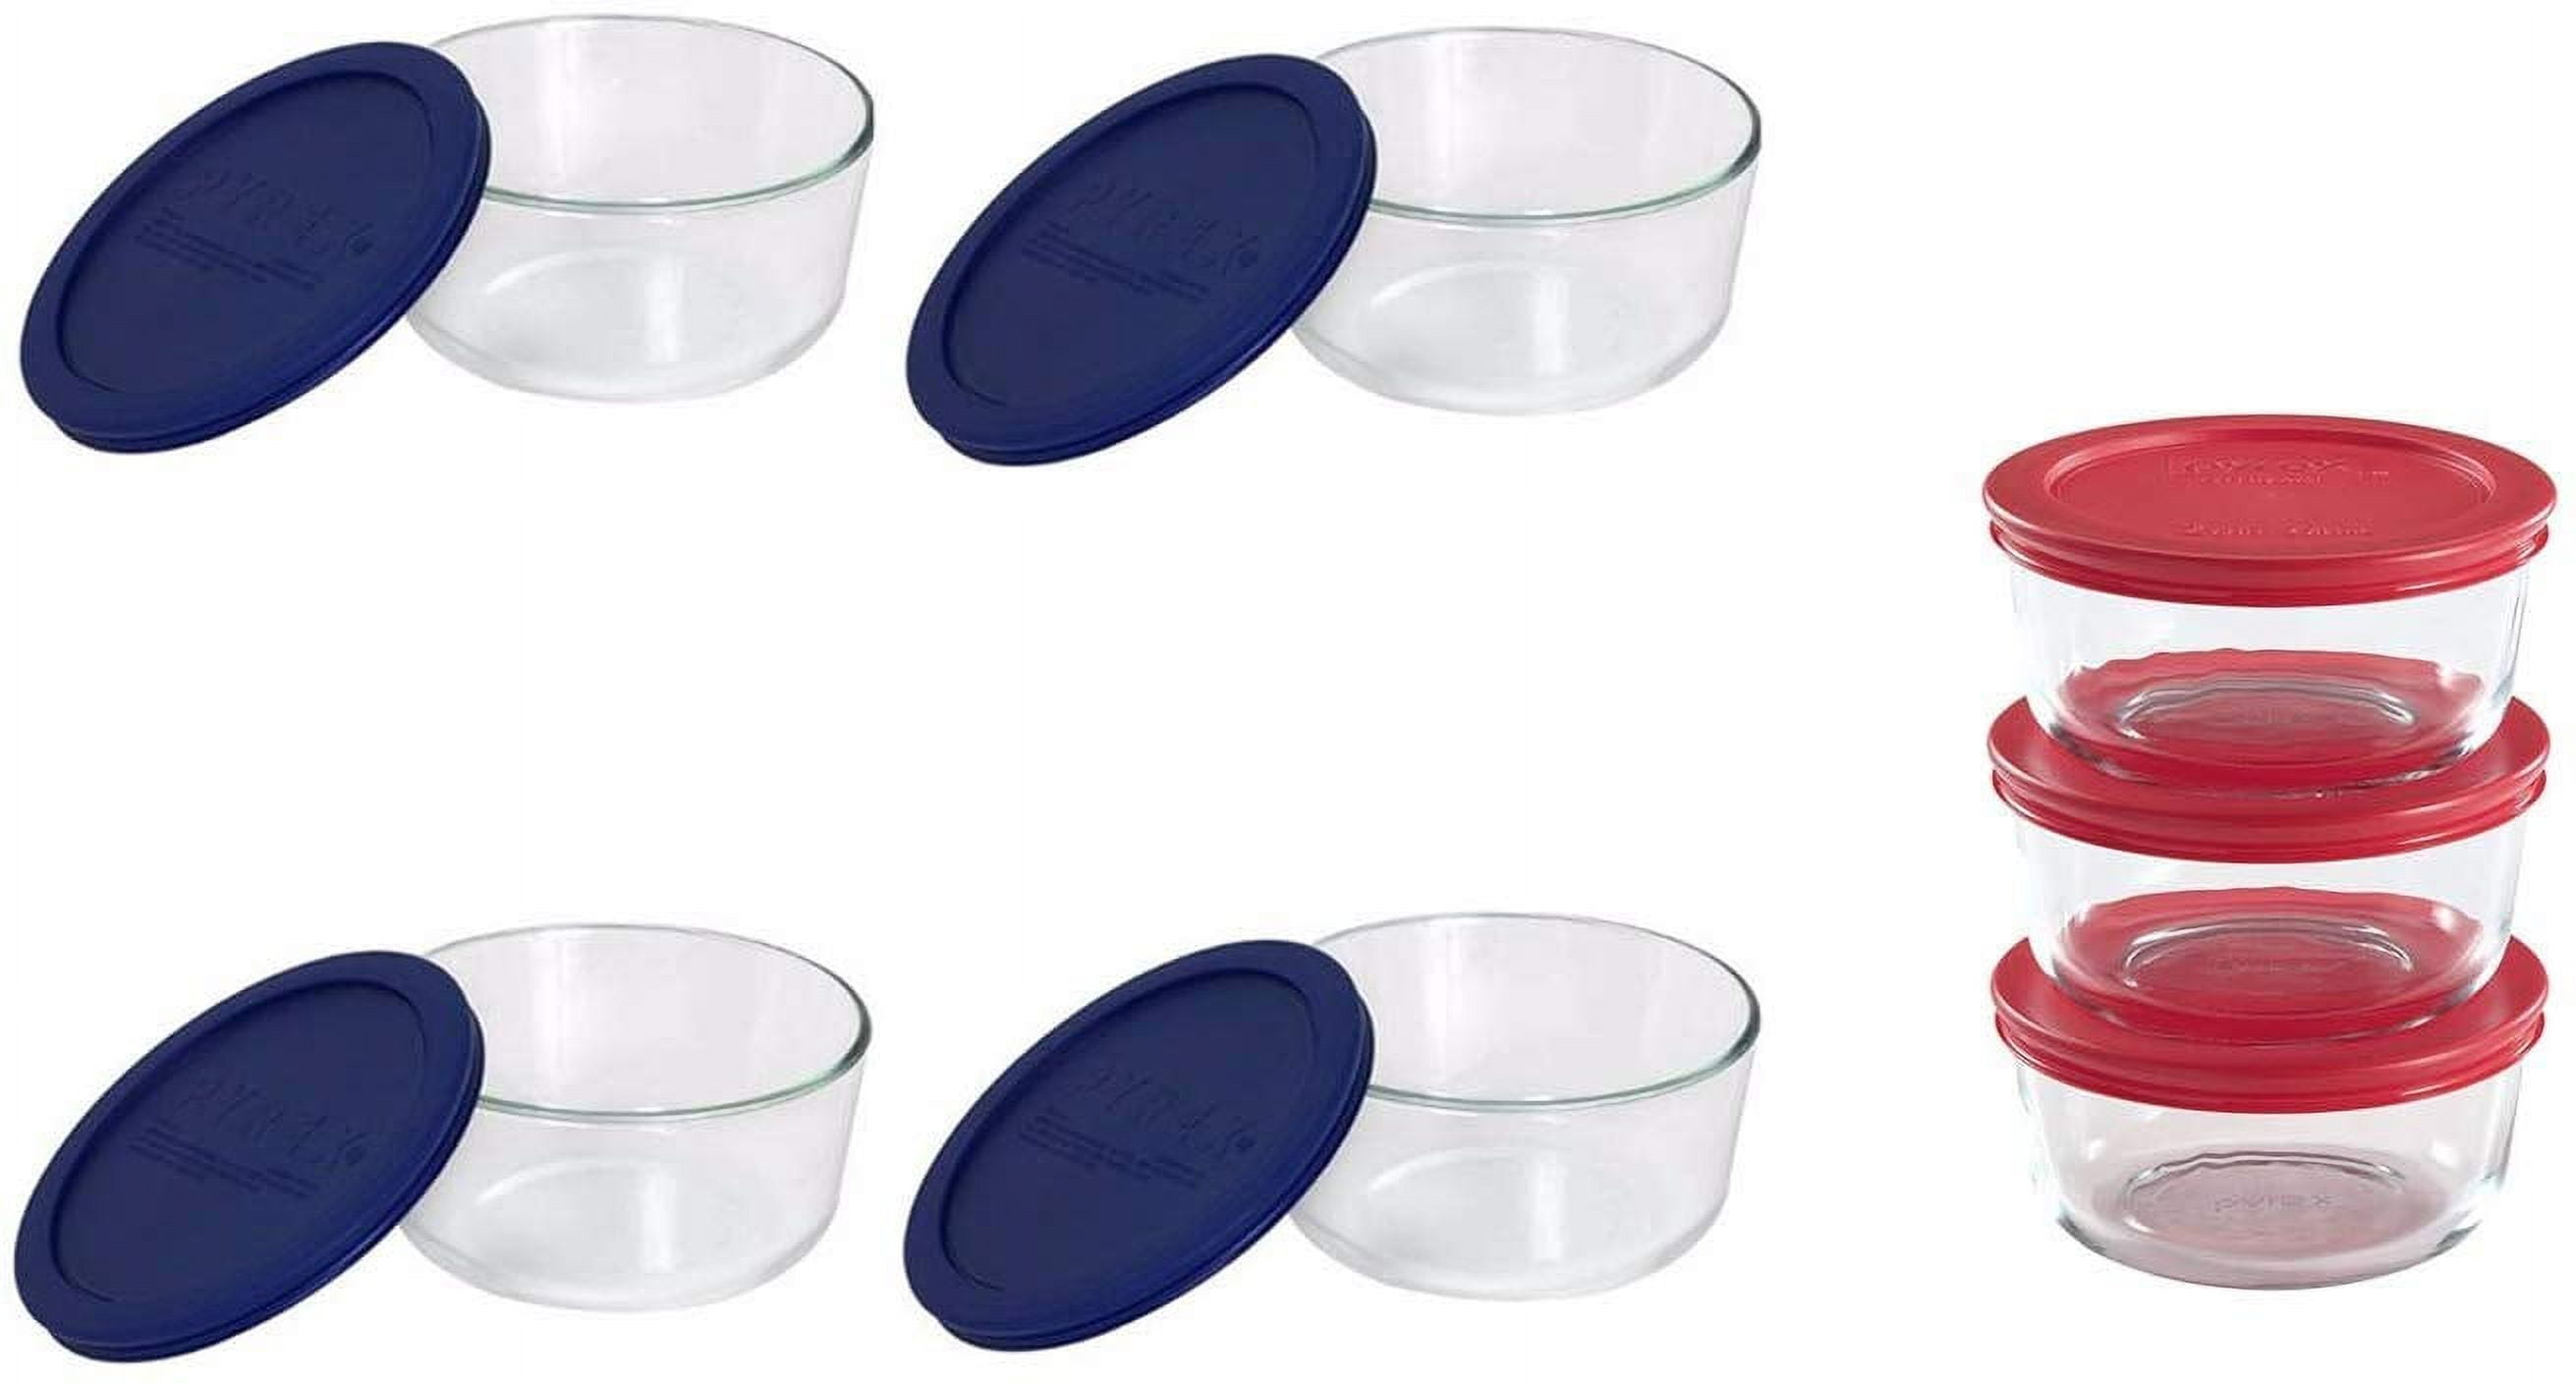 Pyrex Storage 4-Cup Round Dish with Dark Blue Plastic Cover, Clear (Case of  4 Containers)